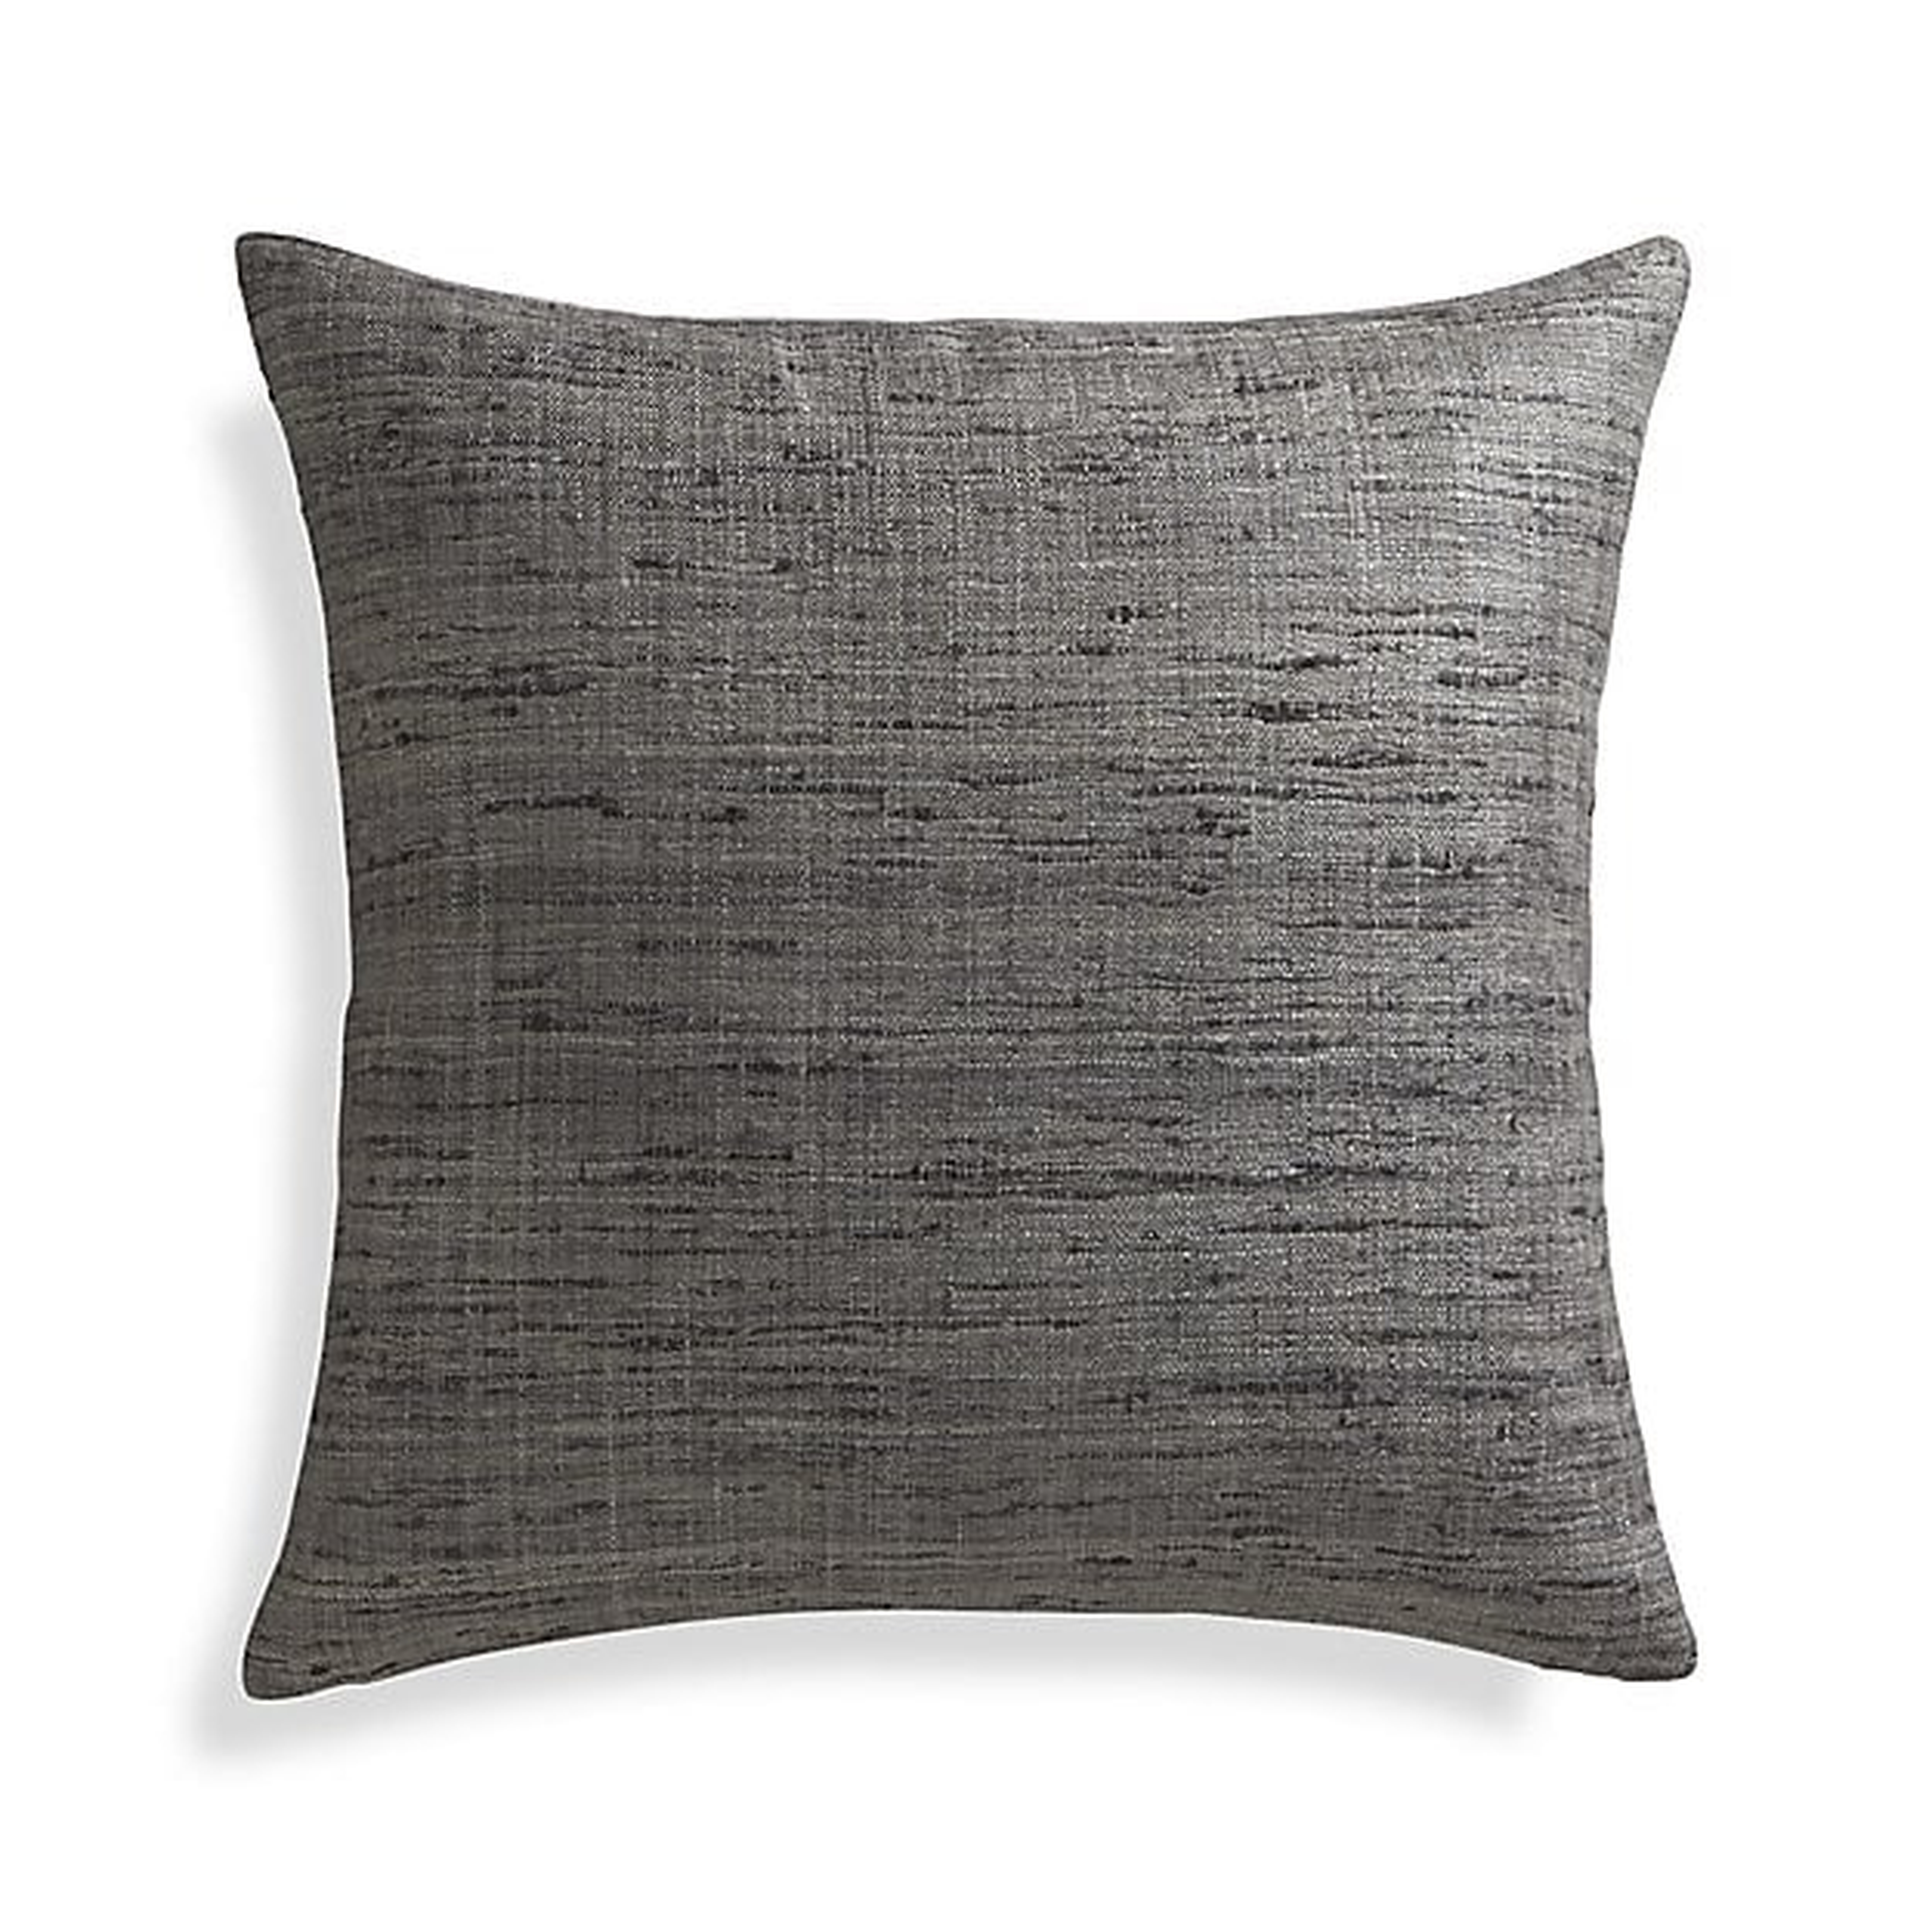 Trevino Pillow - Crate and Barrel